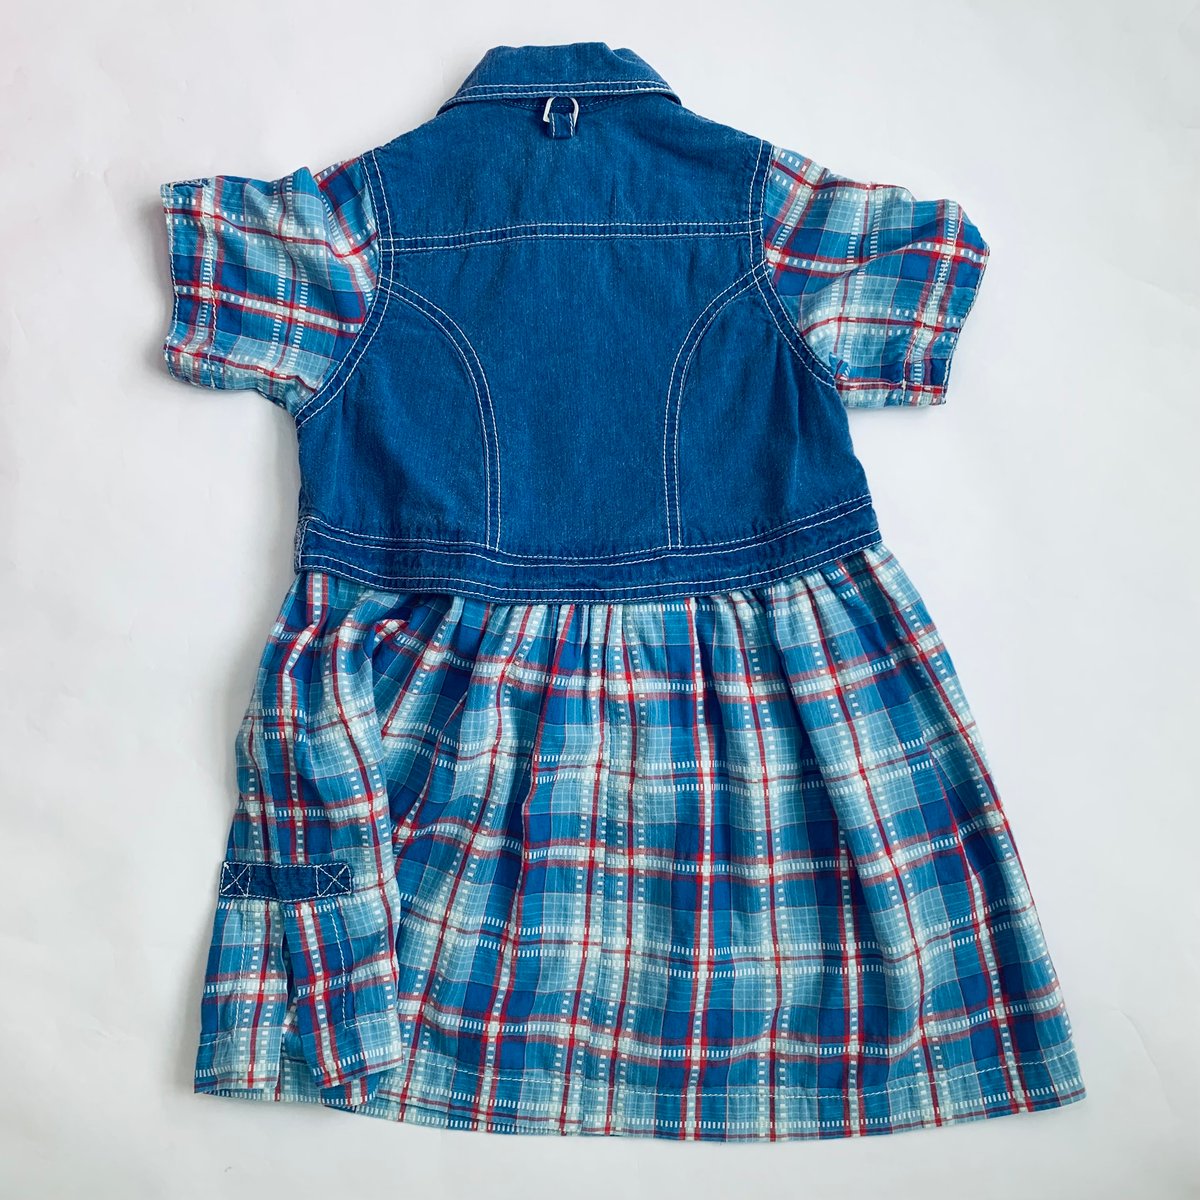 Image of Oilily Denim Check Dress Size 6 years 